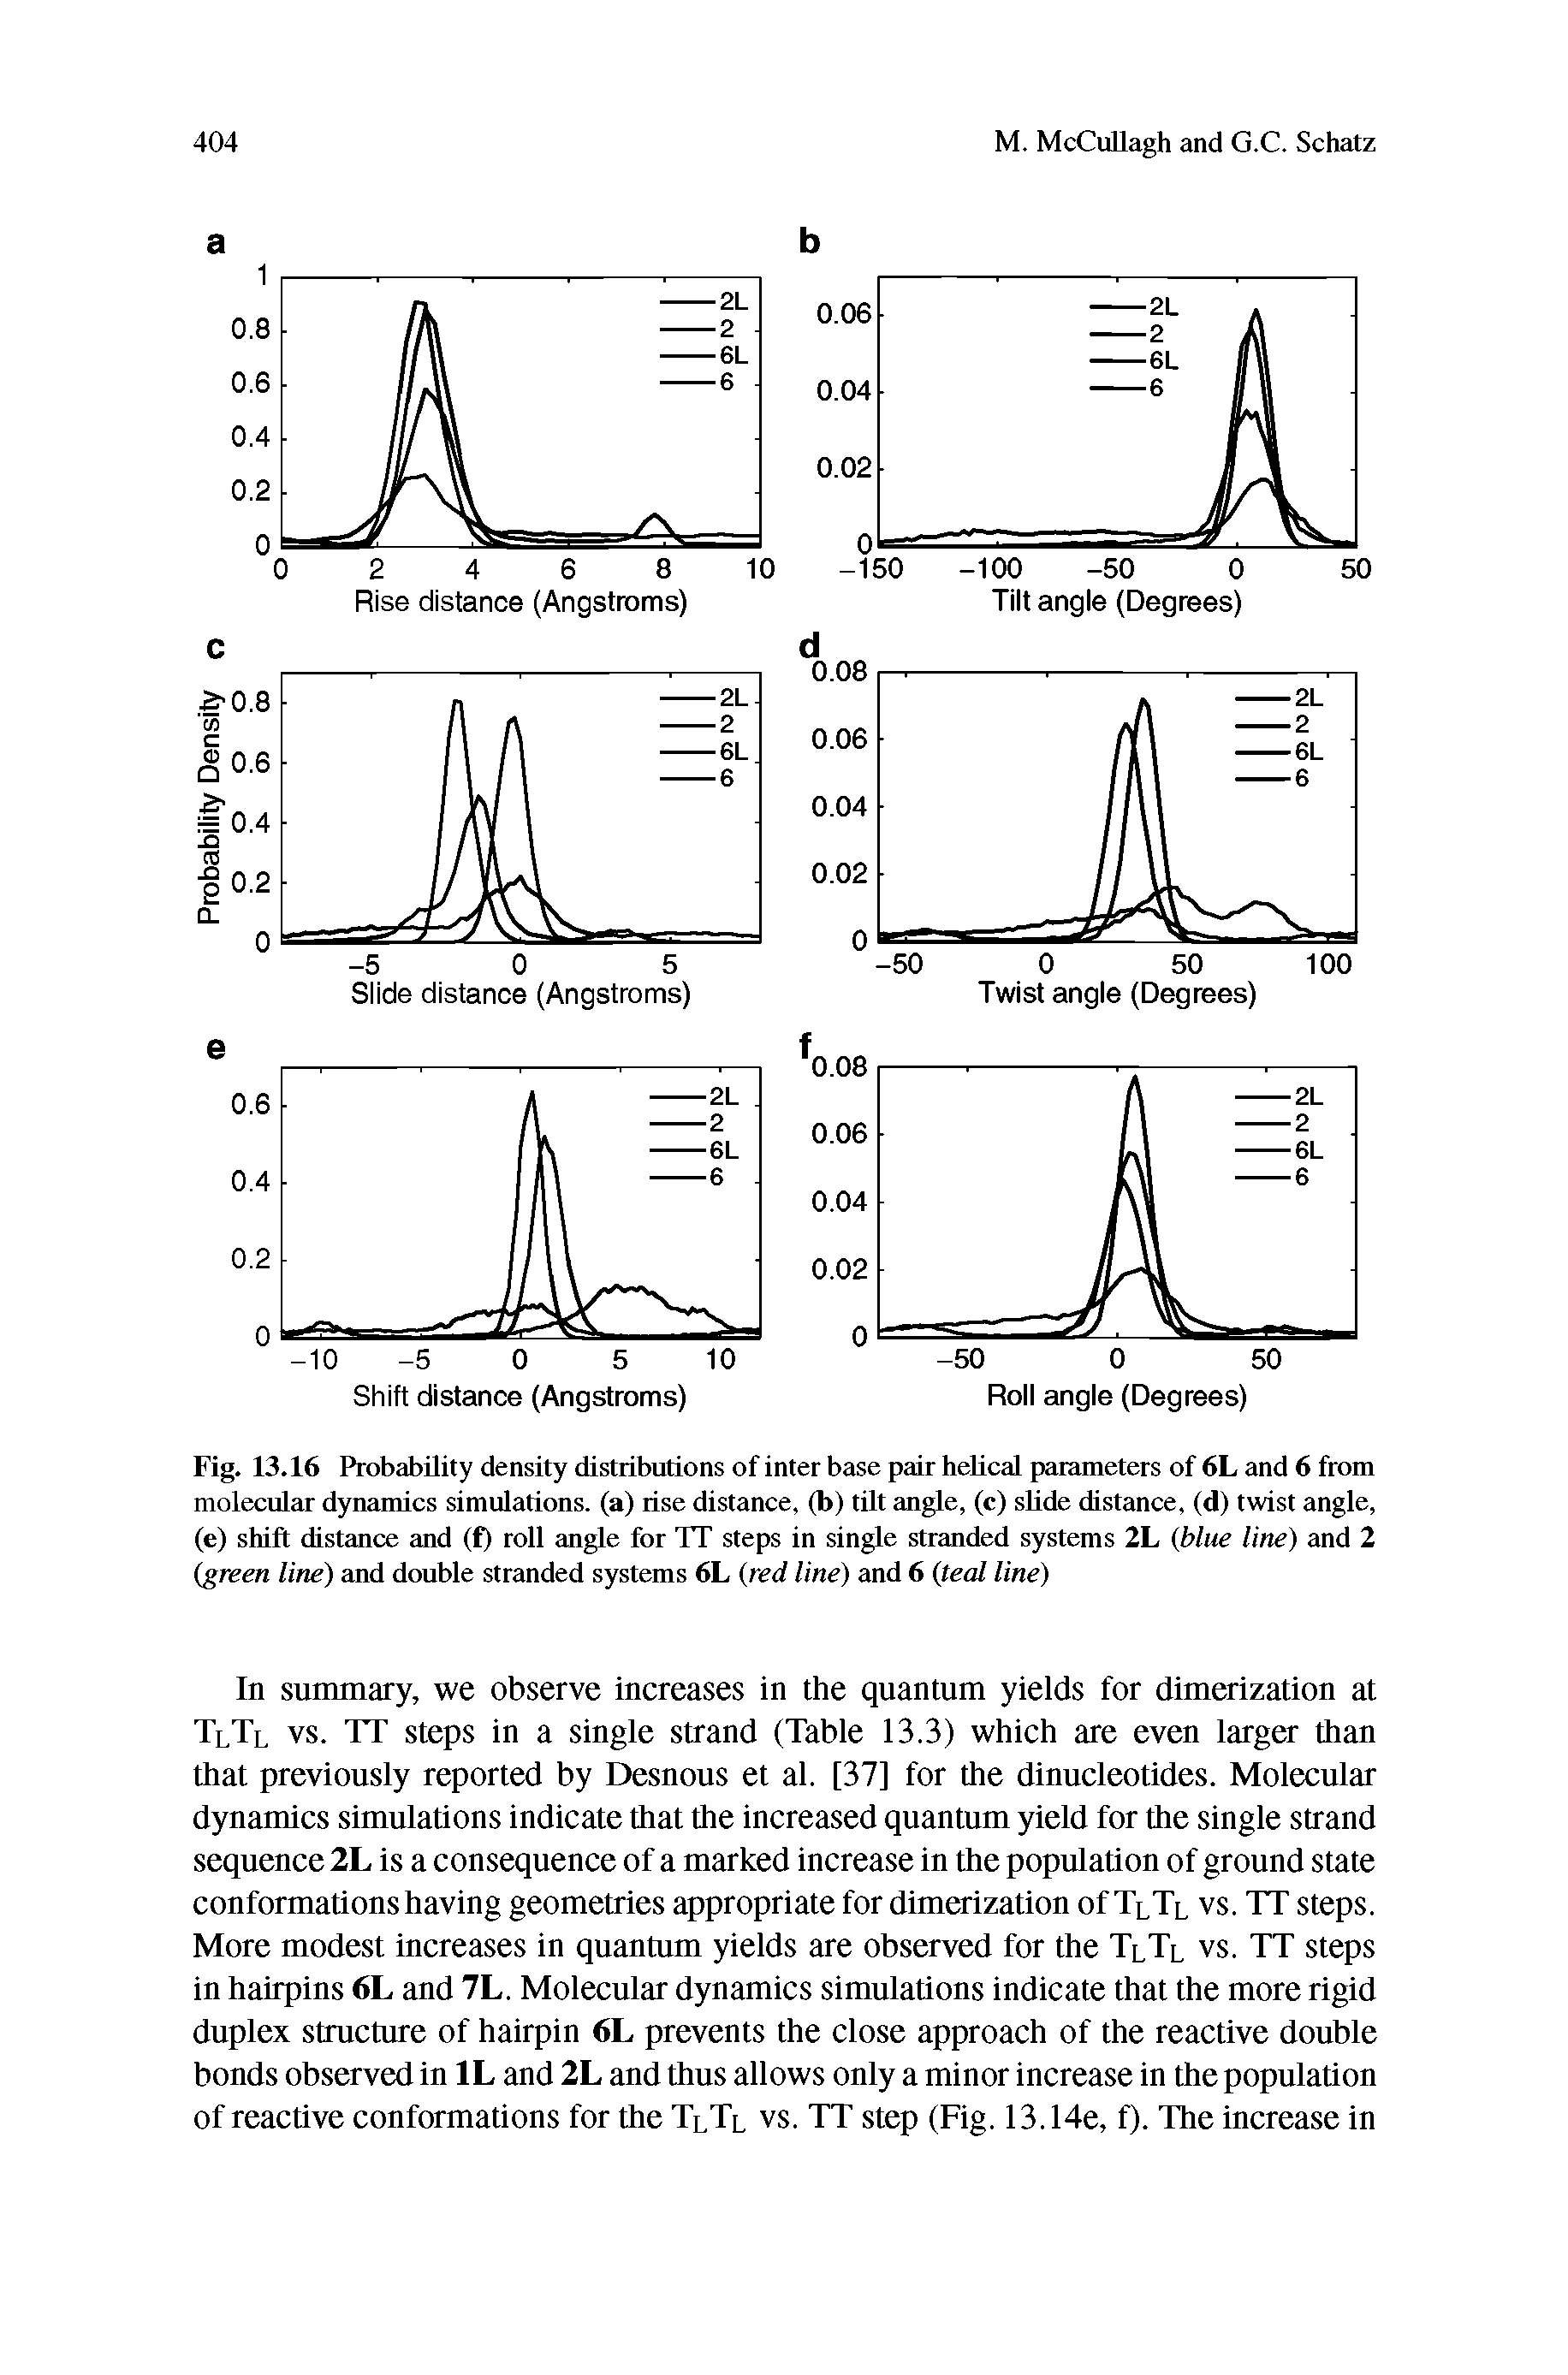 Fig. 13.16 Probability density distributions of inter base pair helical parameters of 6L tind 6 from molecular dynamics simulations, (a) rise distance, (b) tilt angle, (c) slide distemce, (d) twist angle, (e) shift distance and (f) roll angle for TT steps in single stranded systems 2L blue line) tmd 2 (green line) and double stianded systems 6L (red line) tmd 6 (teal line)...